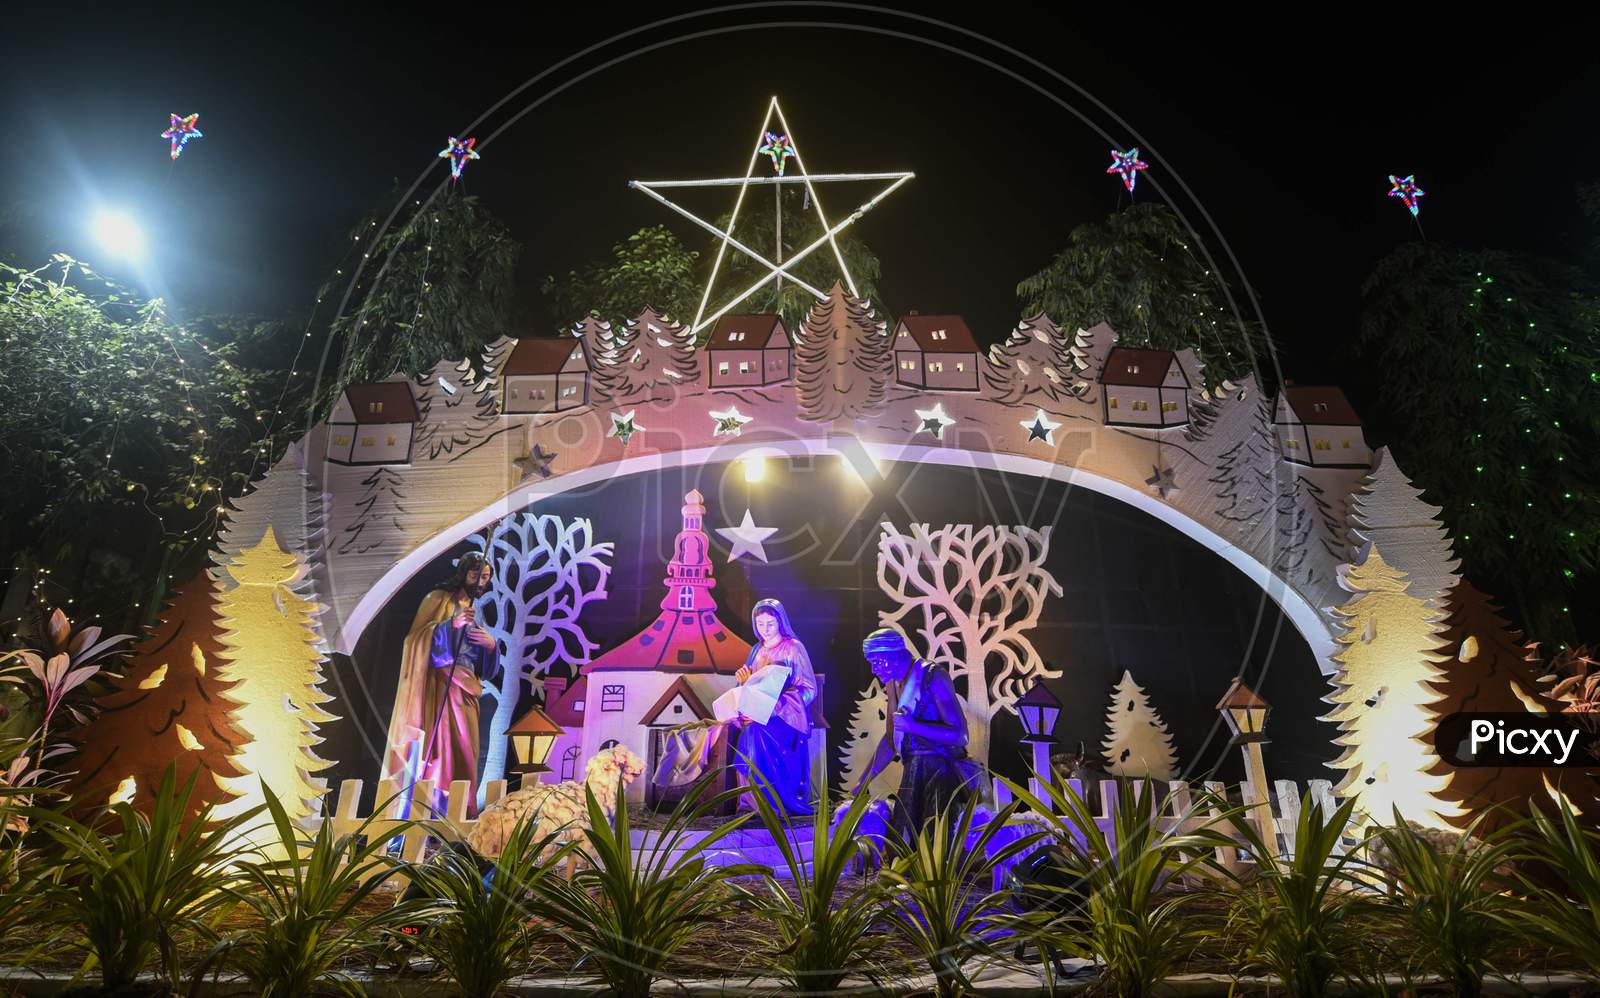 Saints Johns Church Decorated With Illuminates Lights, On The Eve Of Christmas In Guwahati